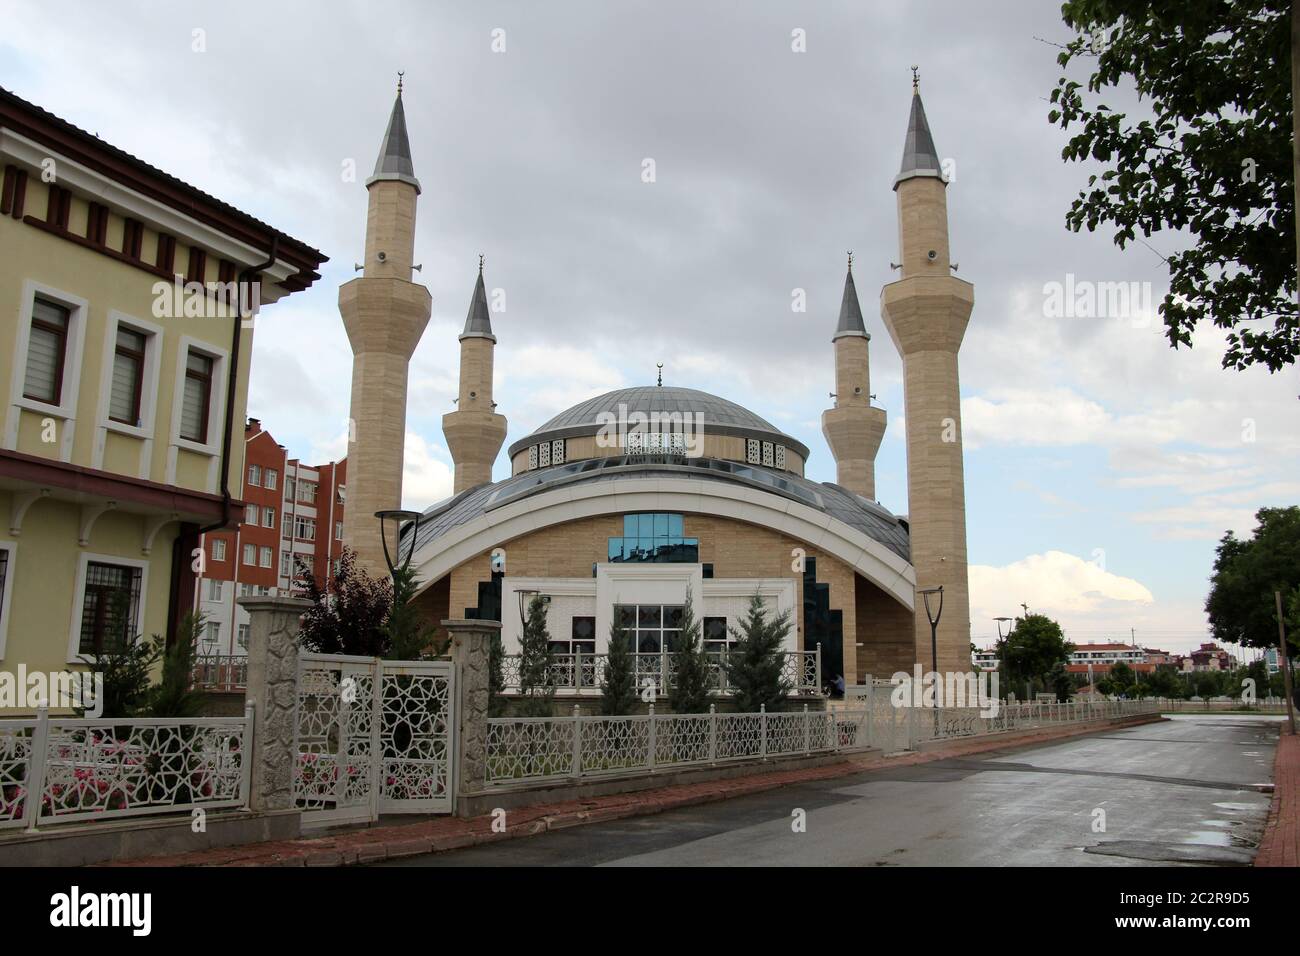 Celebi Mosque, located in the city of Konya, Turkey. It was built by Karatay Municipality between 2015 and 2017. The mosque has 4 minarets. Stock Photo